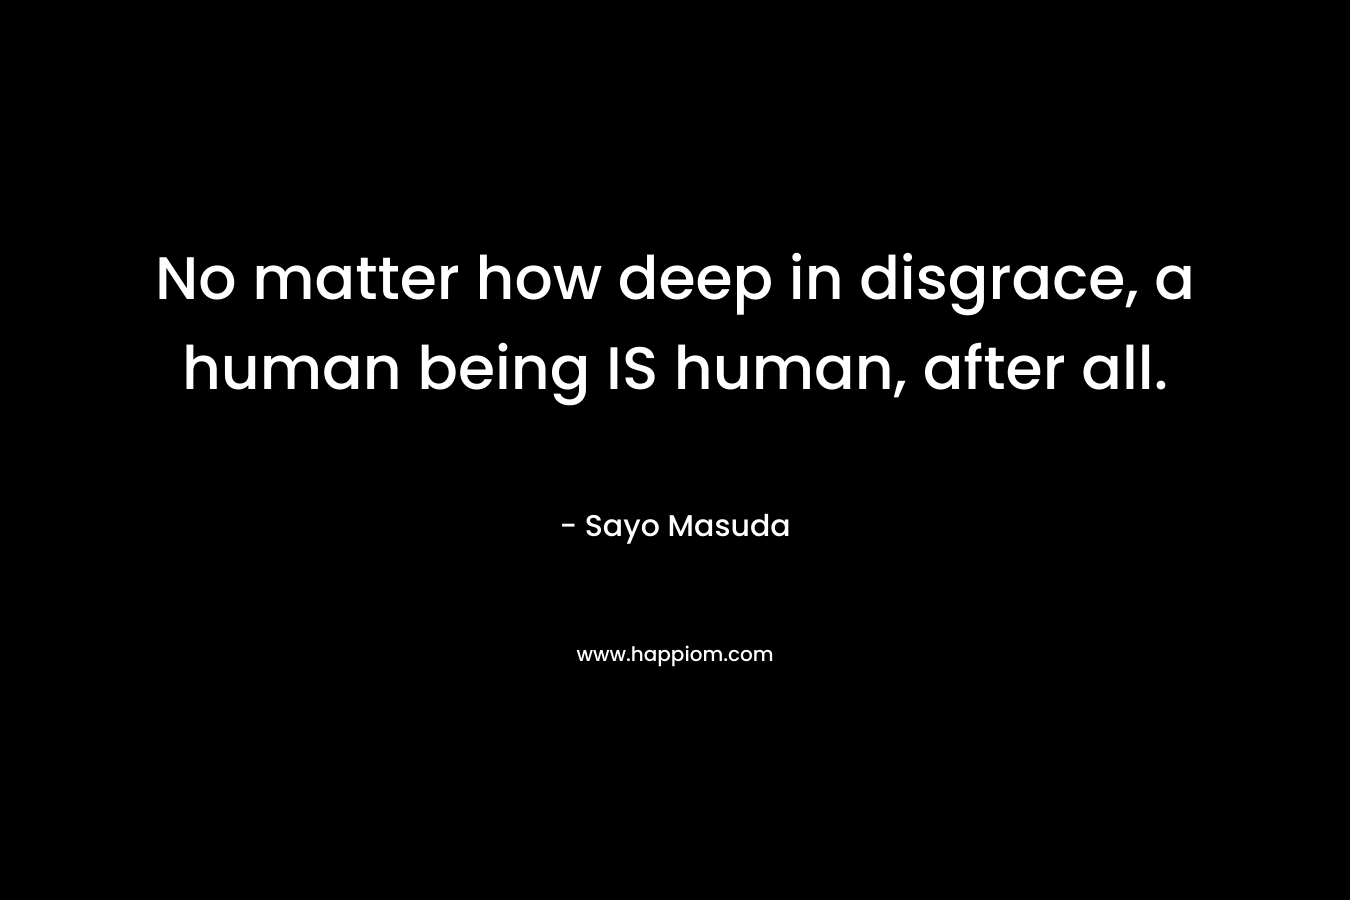 No matter how deep in disgrace, a human being IS human, after all. – Sayo Masuda